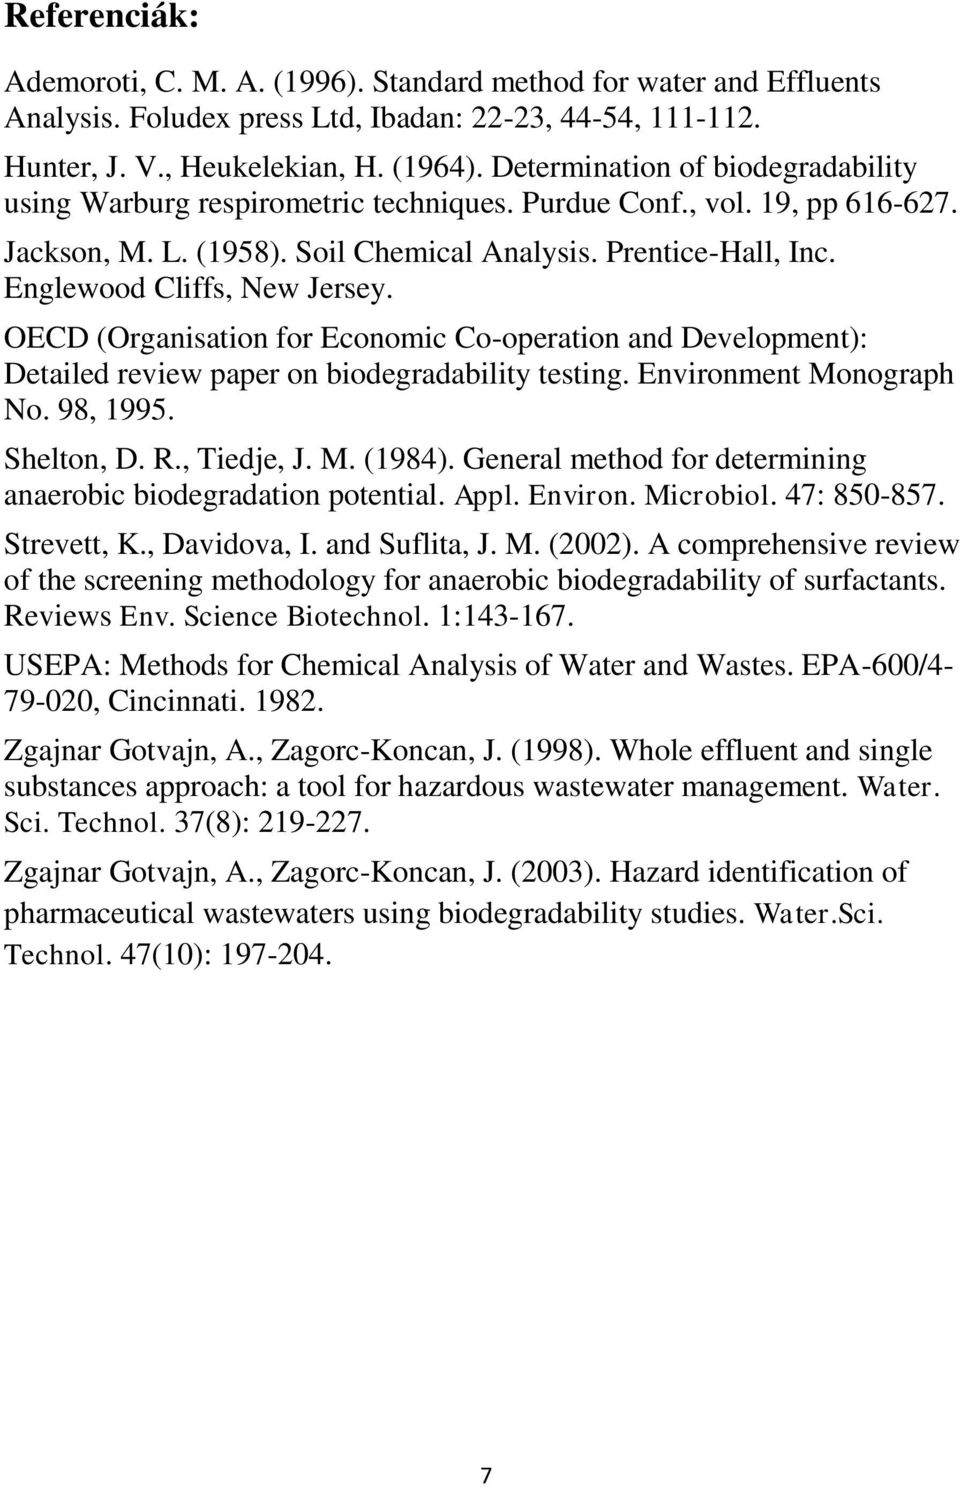 Englewood Cliffs, New Jersey. OECD (Organisation for Economic Co-operation and Development): Detailed review paper on biodegradability testing. Environment Monograph No. 98, 1995. Shelton, D. R.